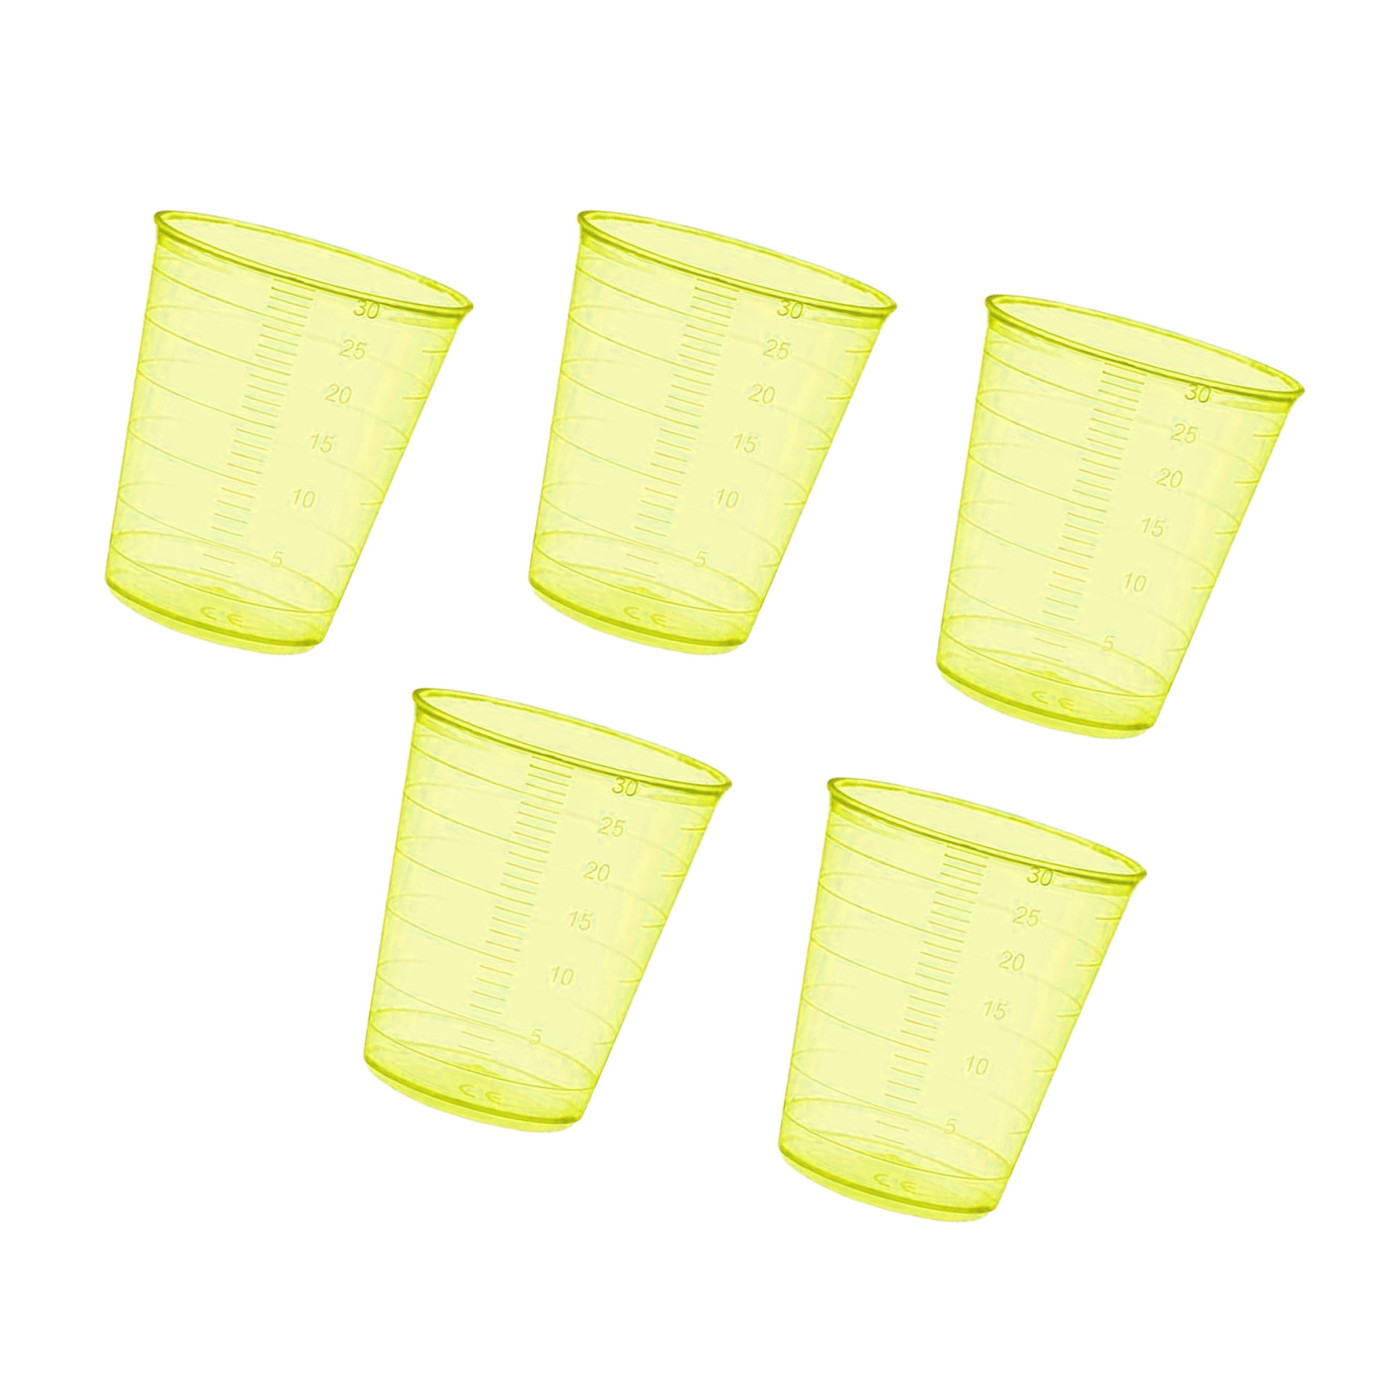 https://www.woodtoolsanddeco.com/11296-large_default/set-of-160-measuring-cups-30-ml-yellow-pp-for-frequent-use.jpg